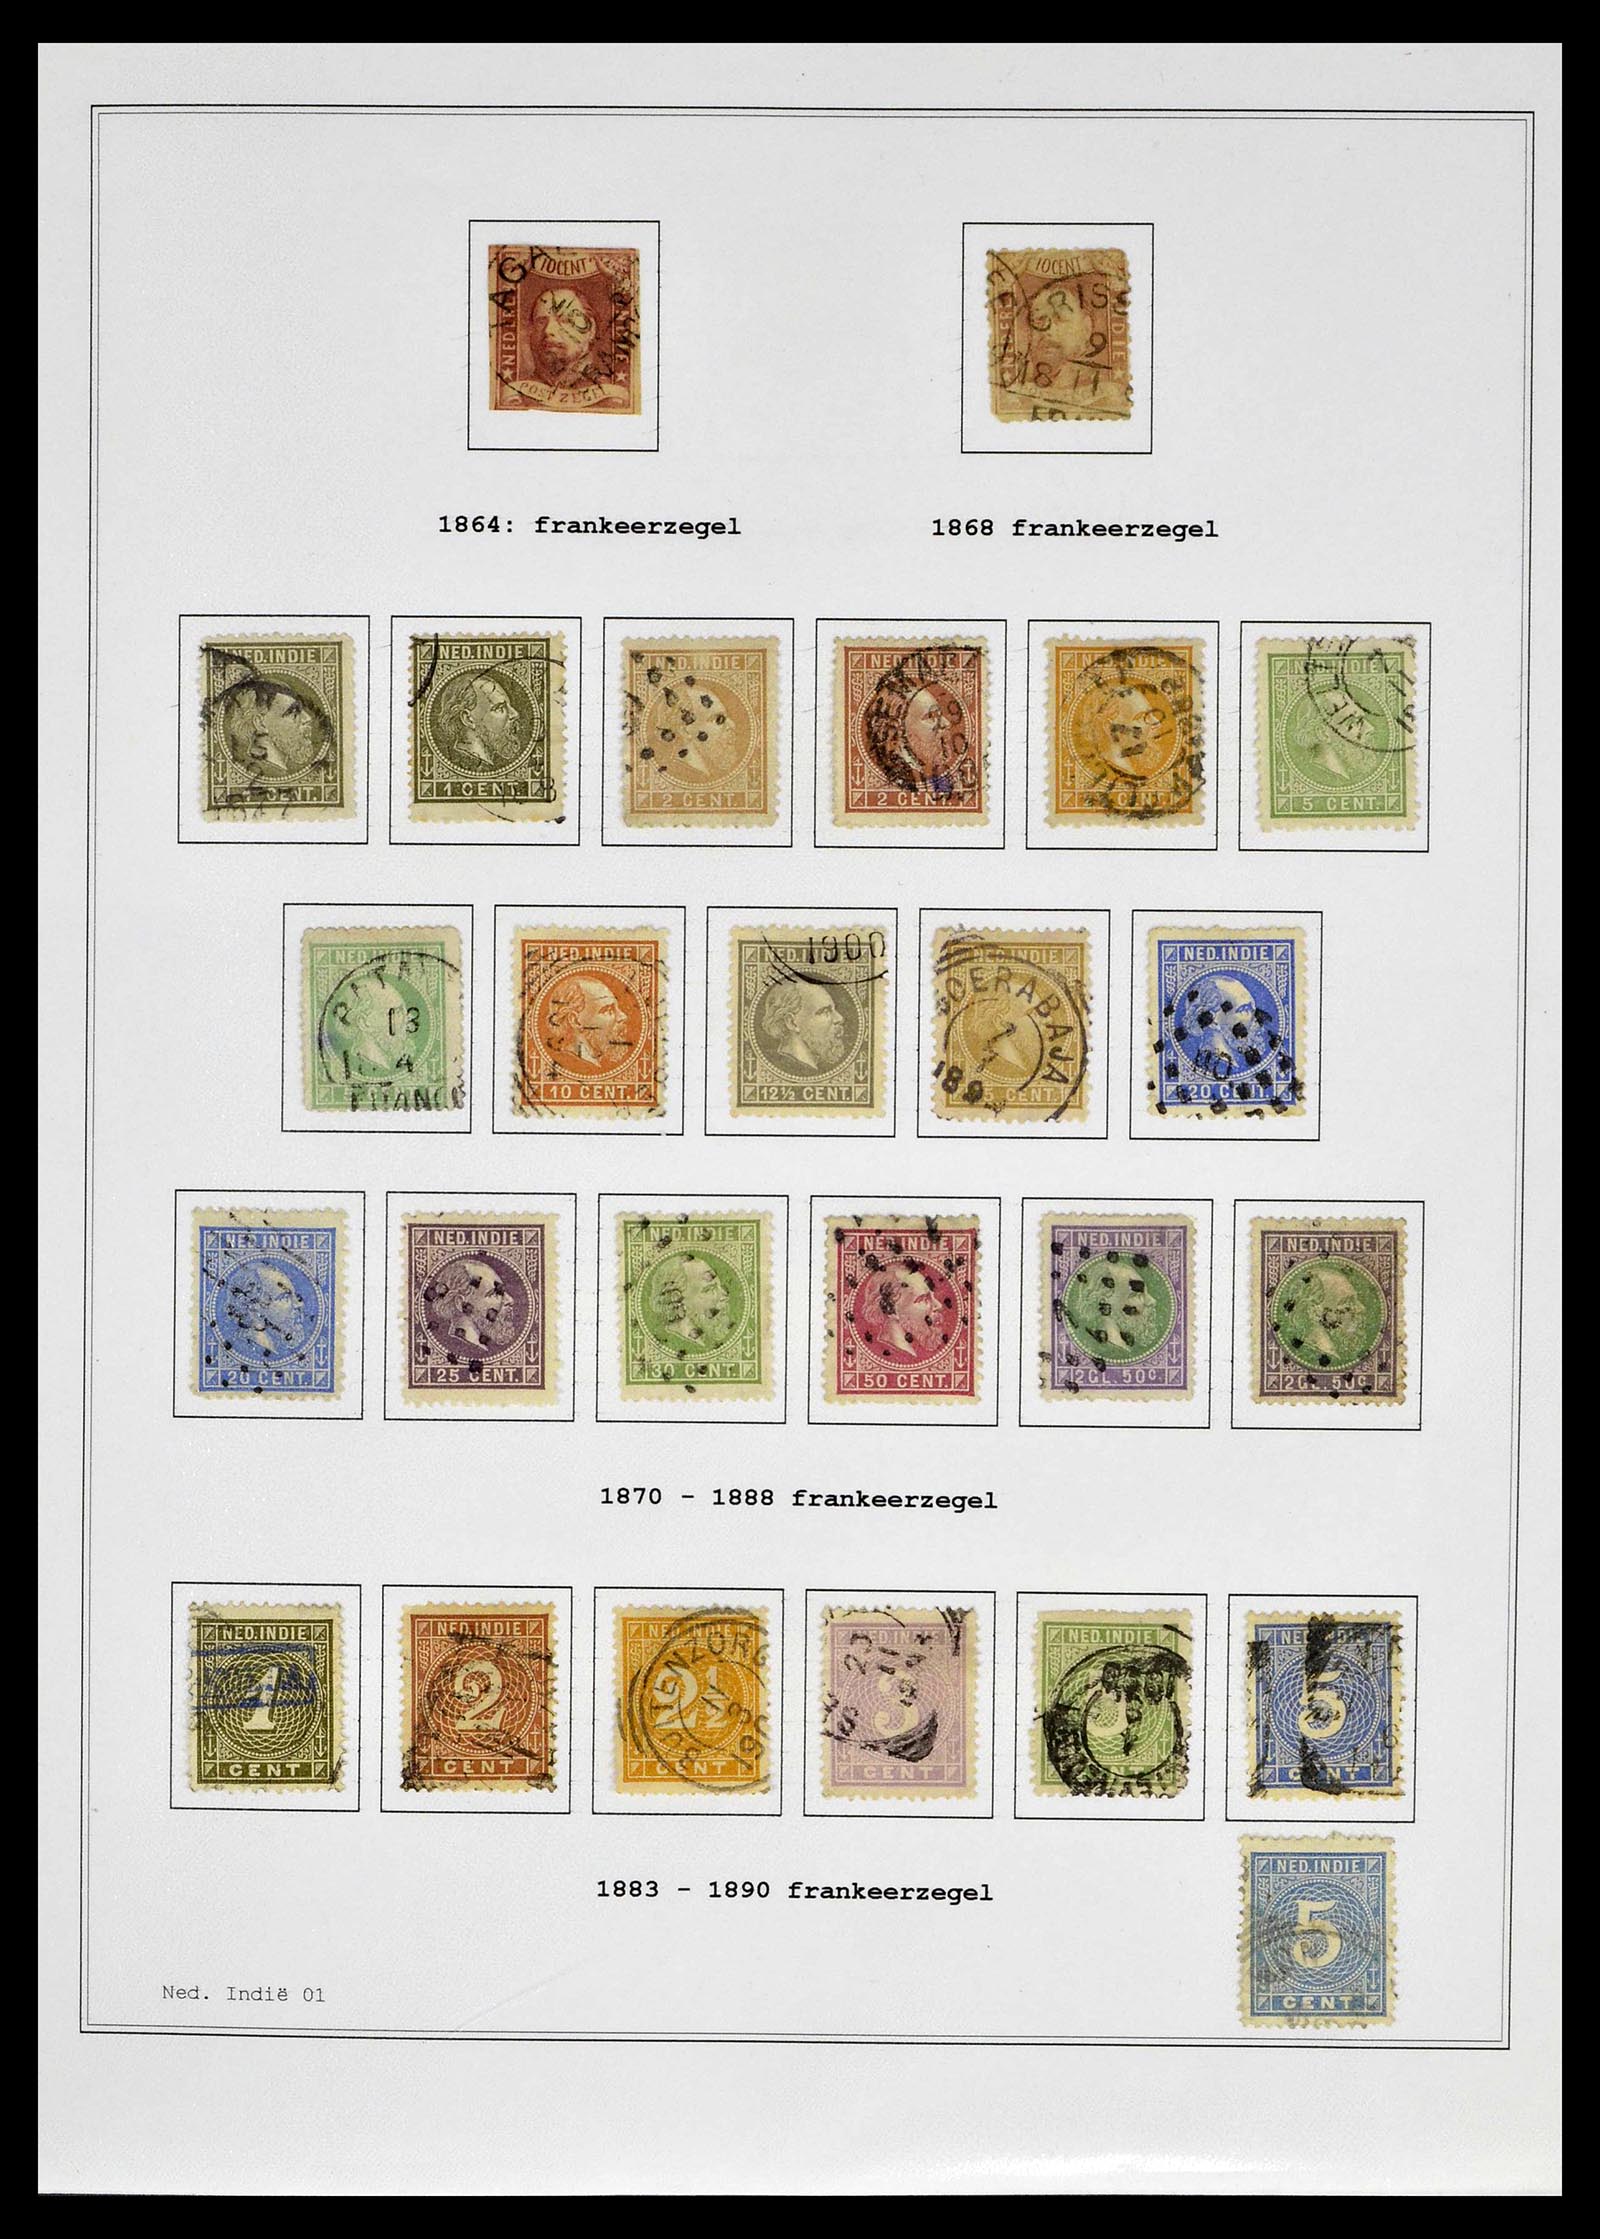 39026 0002 - Stamp collection 39026 Dutch east Indies and Suriname 1864-1975.